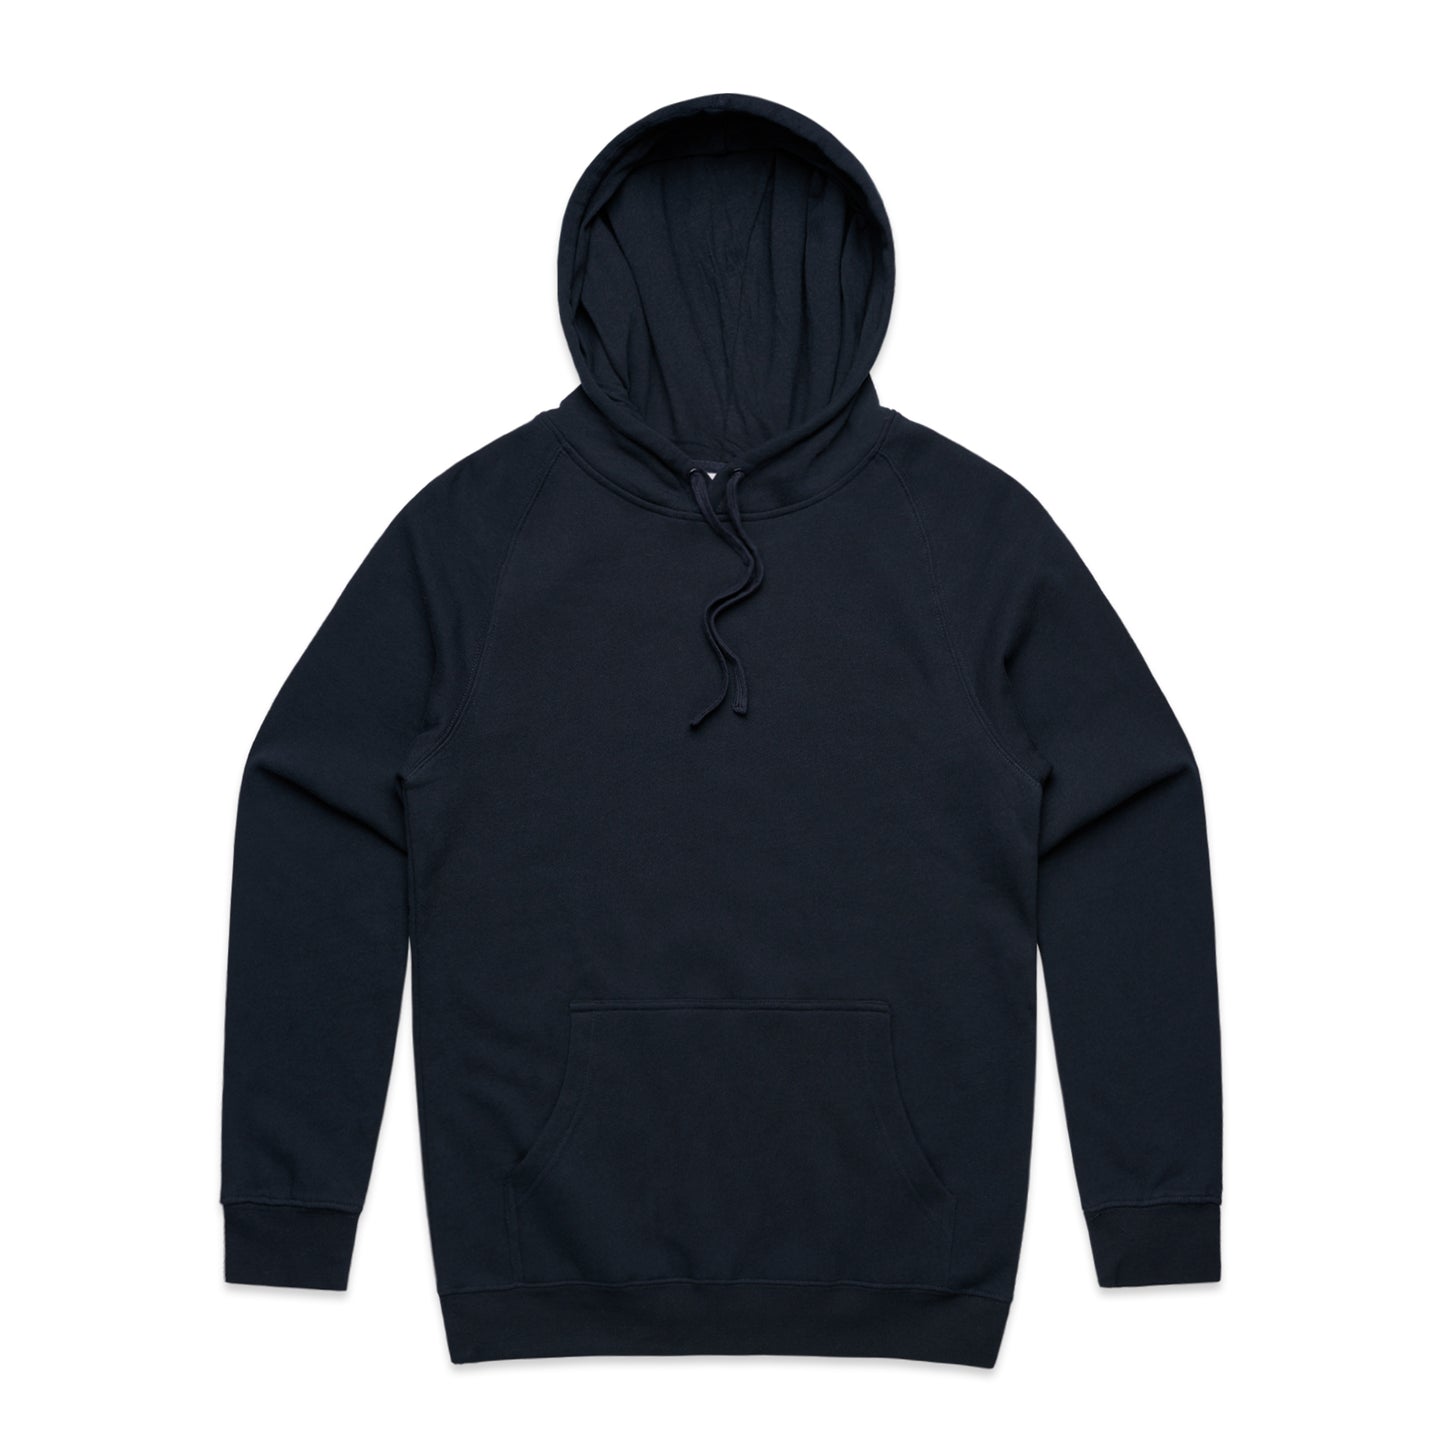 DURIE HILL FC GRAPHIC HOODIE - MEN'S